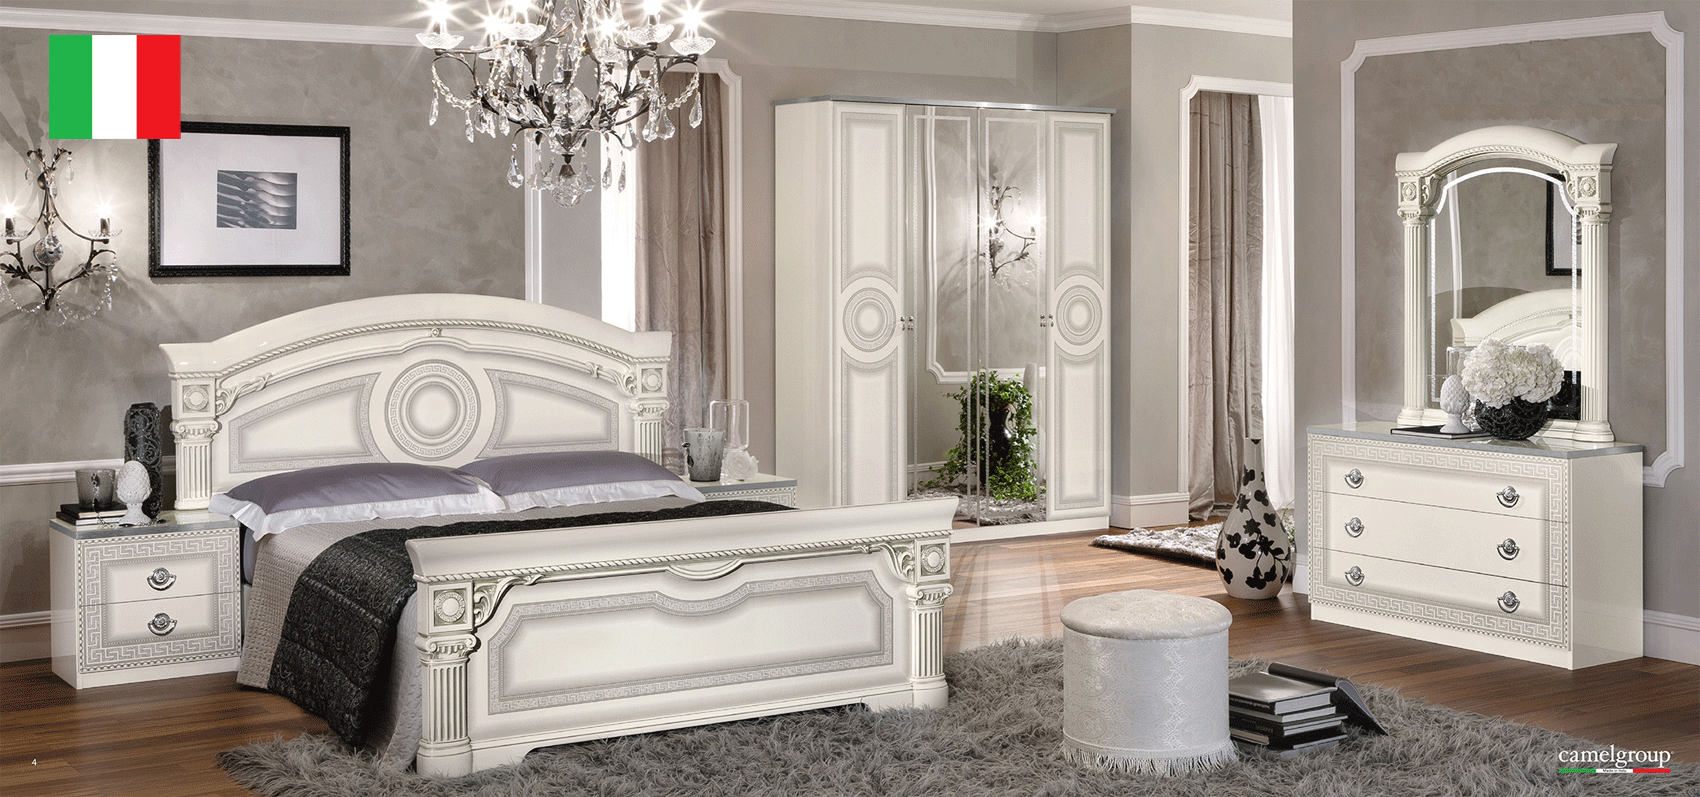 Brands Camel Gold Collection, Italy Aida Bedroom, White w/Silver, Camelgroup Italy